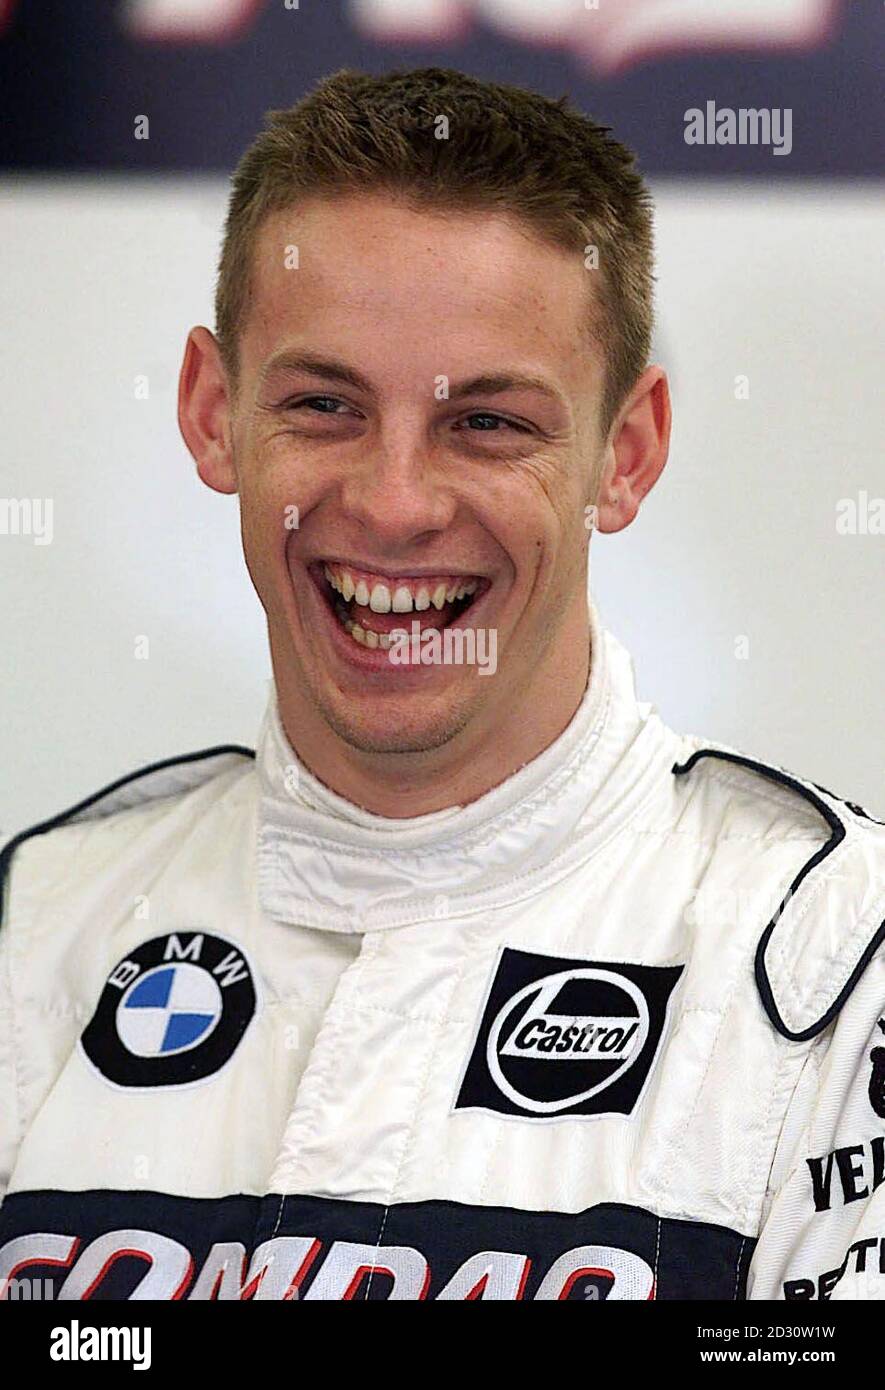 Delighted Williams BMW Formula One Grand Prix driver Jenson Button, after he finished fifth in the British Grand Prix at Silverstone. Stock Photo